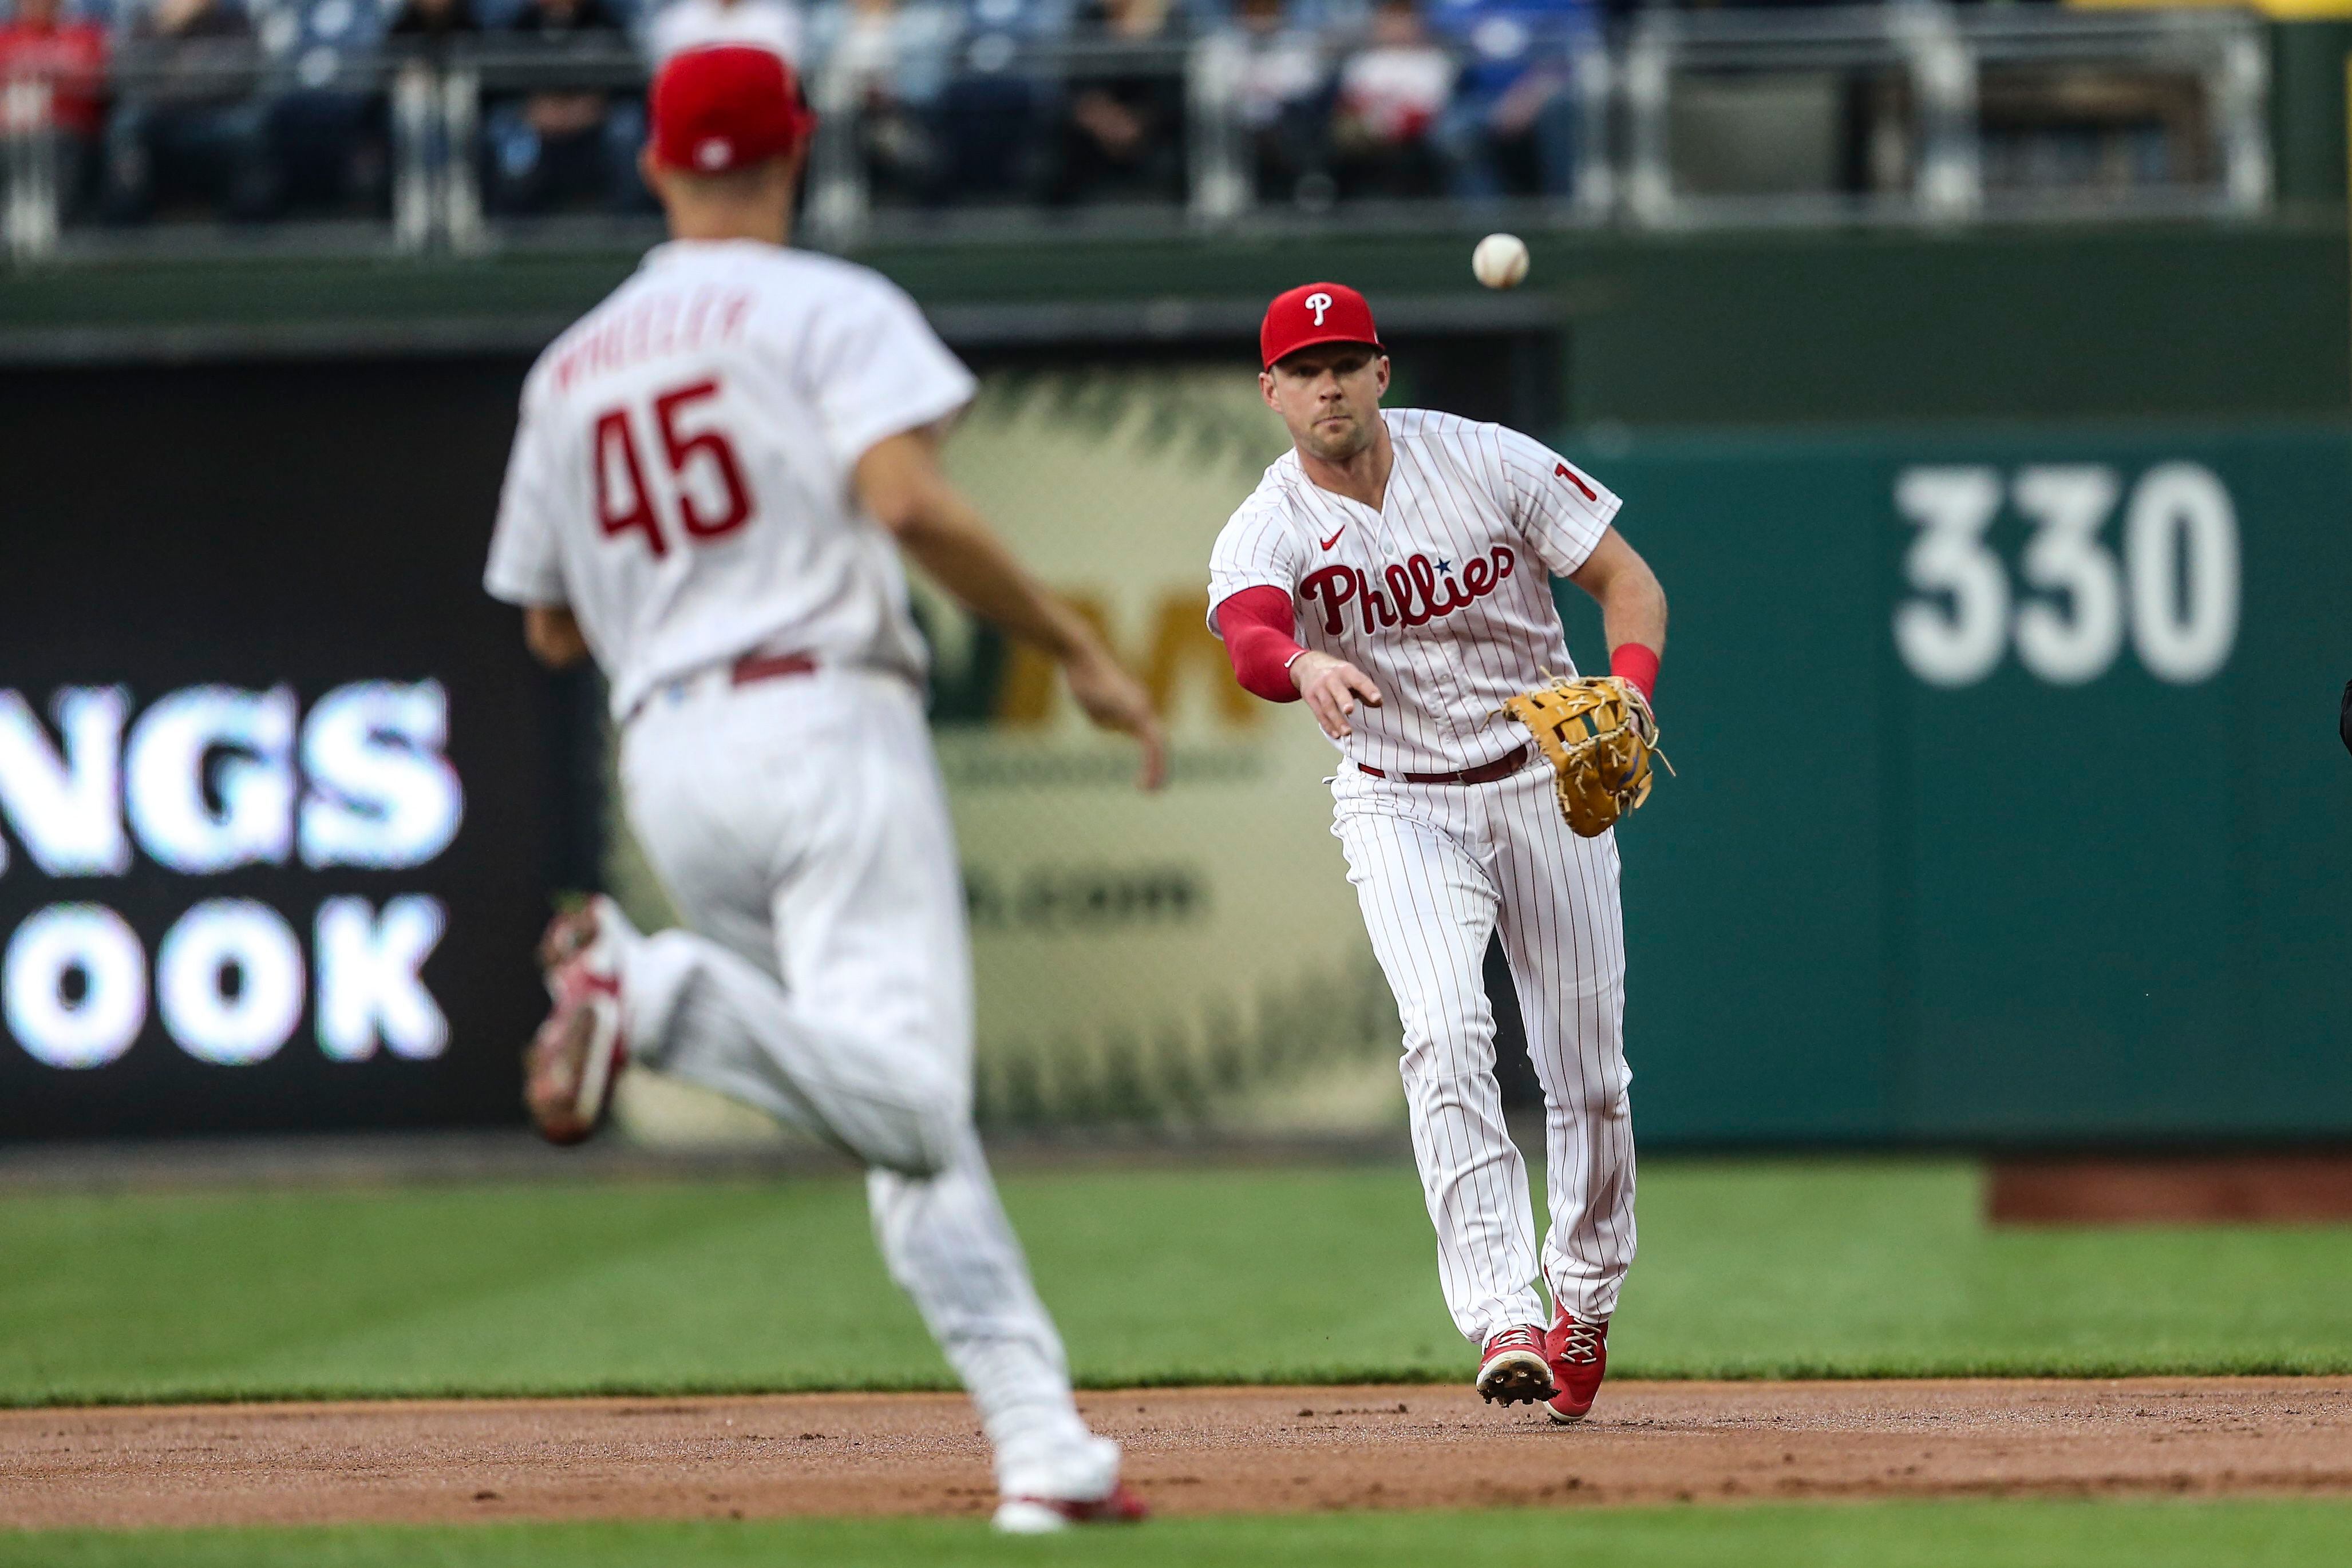 Rhys Hoskins injury: Alec Bohm, Miguel Sanó and more options for Phillies  at first base – maybe Bryce Harper? 